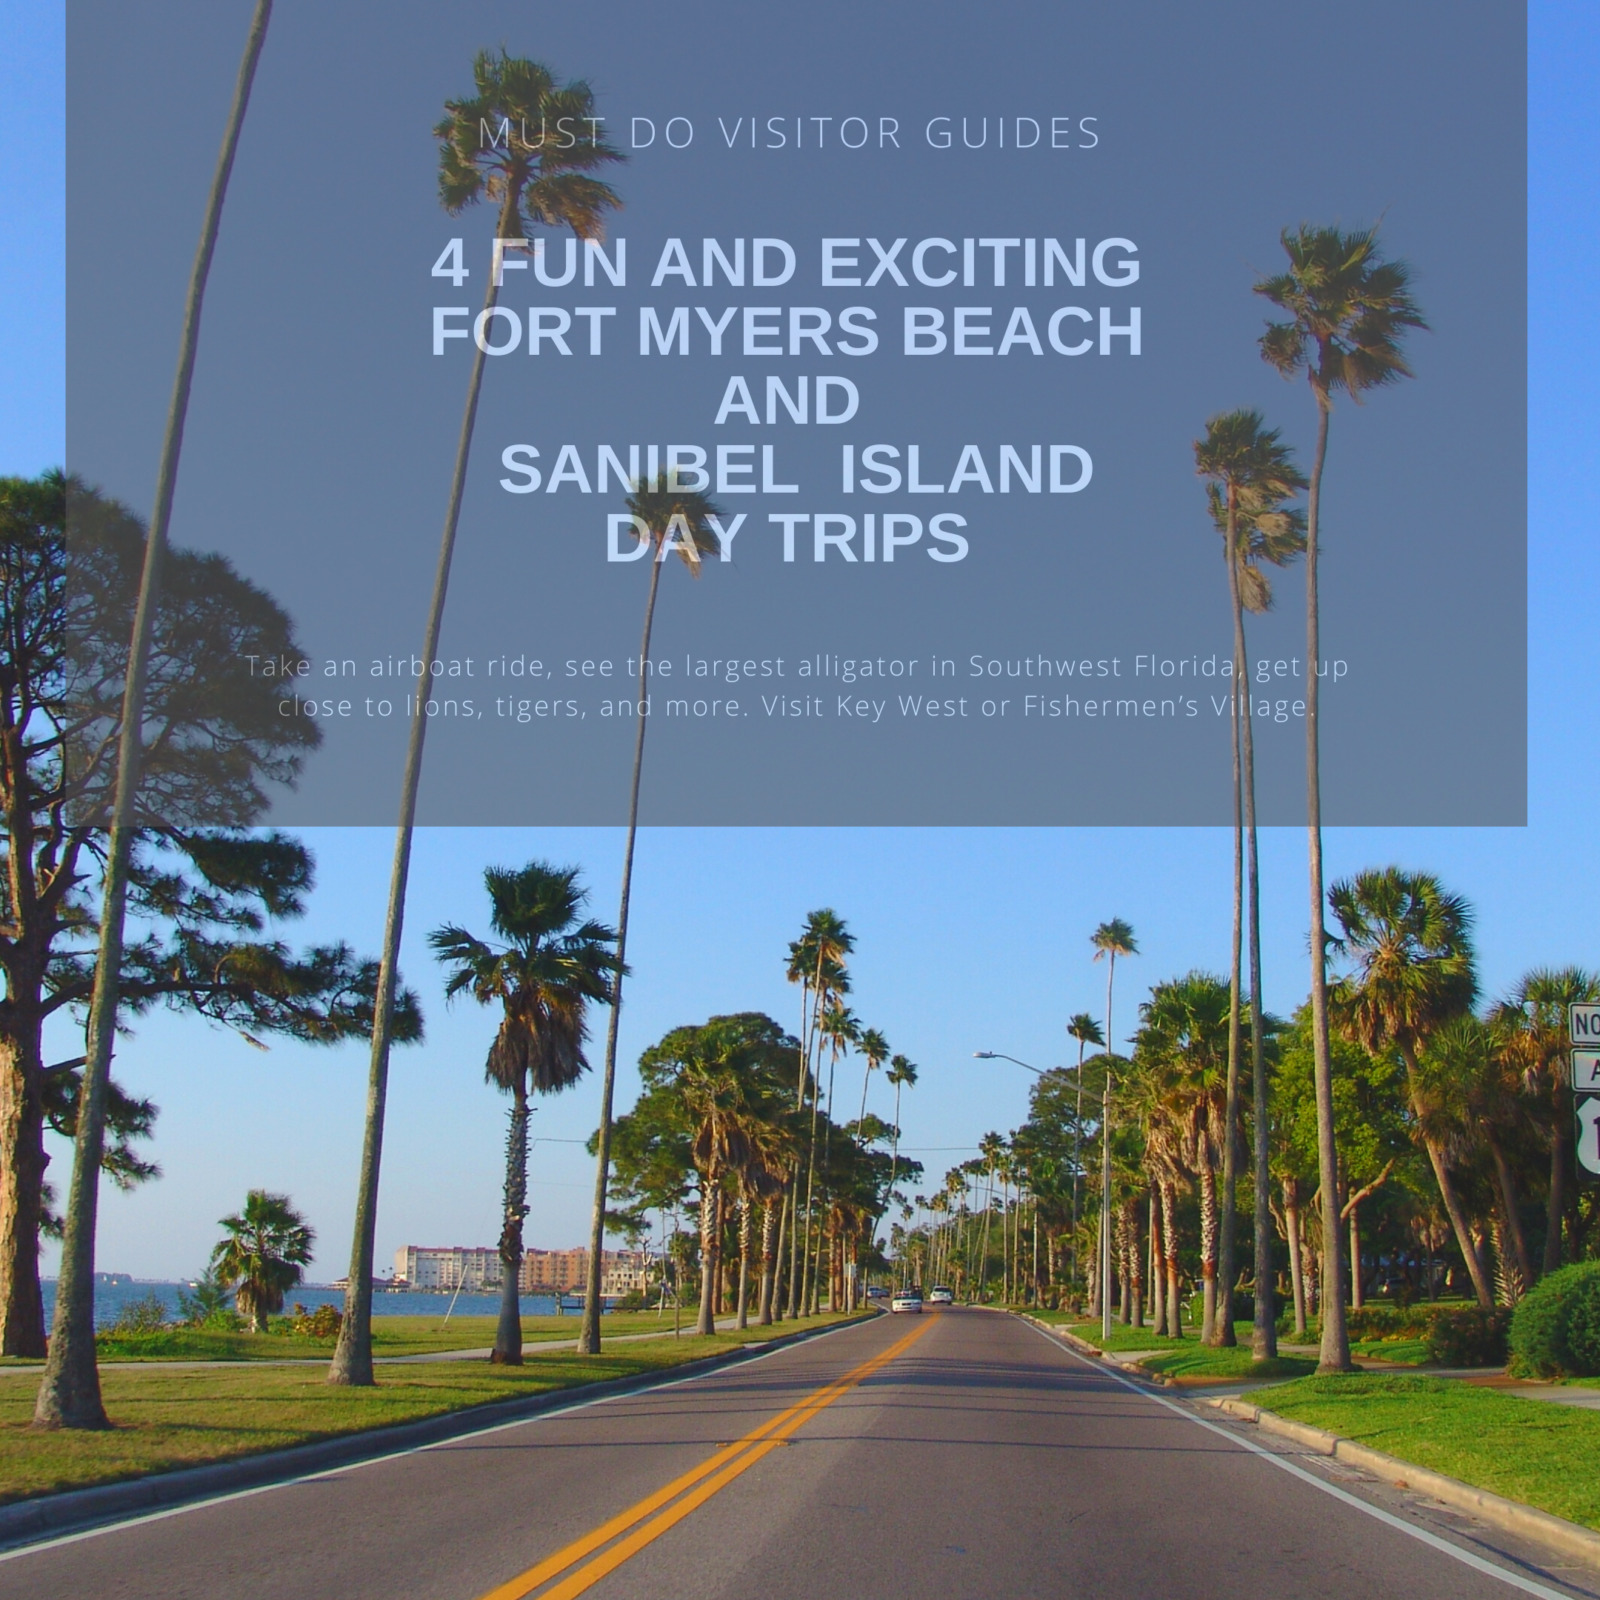 4 Fun and Exciting Fort Myers Beach and Sanibel Day Trips. Must Do Visitor Guides | MustDo.com